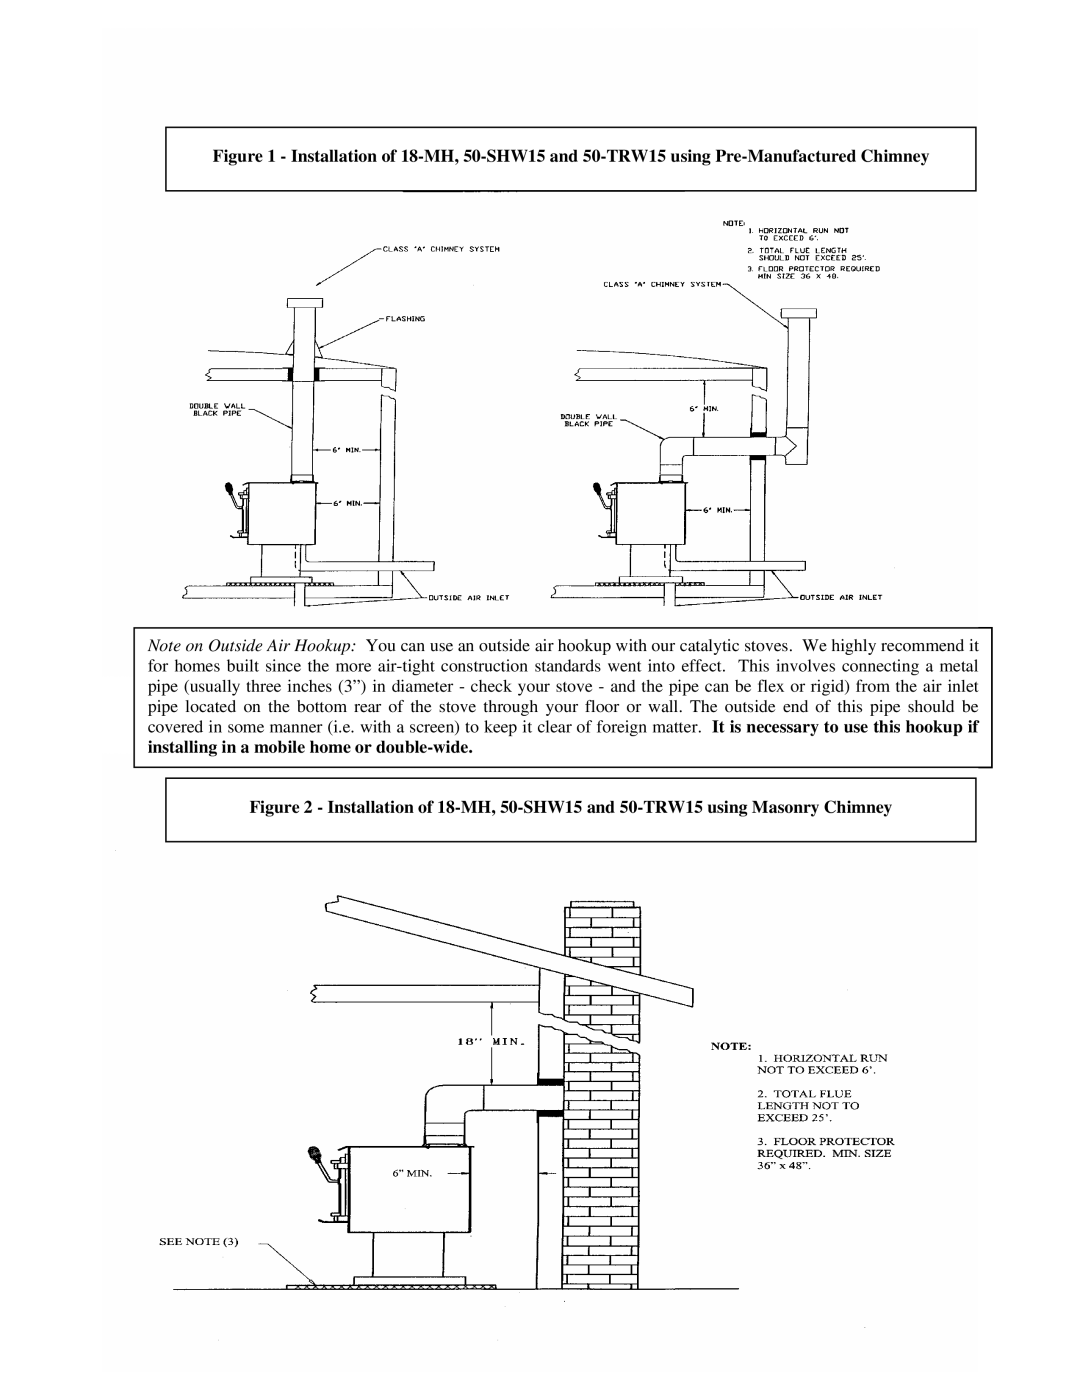 England's Stove Works 50-SHW15, 50-TRW15, 18-MH operation manual installing in a mobile home or double-wide 